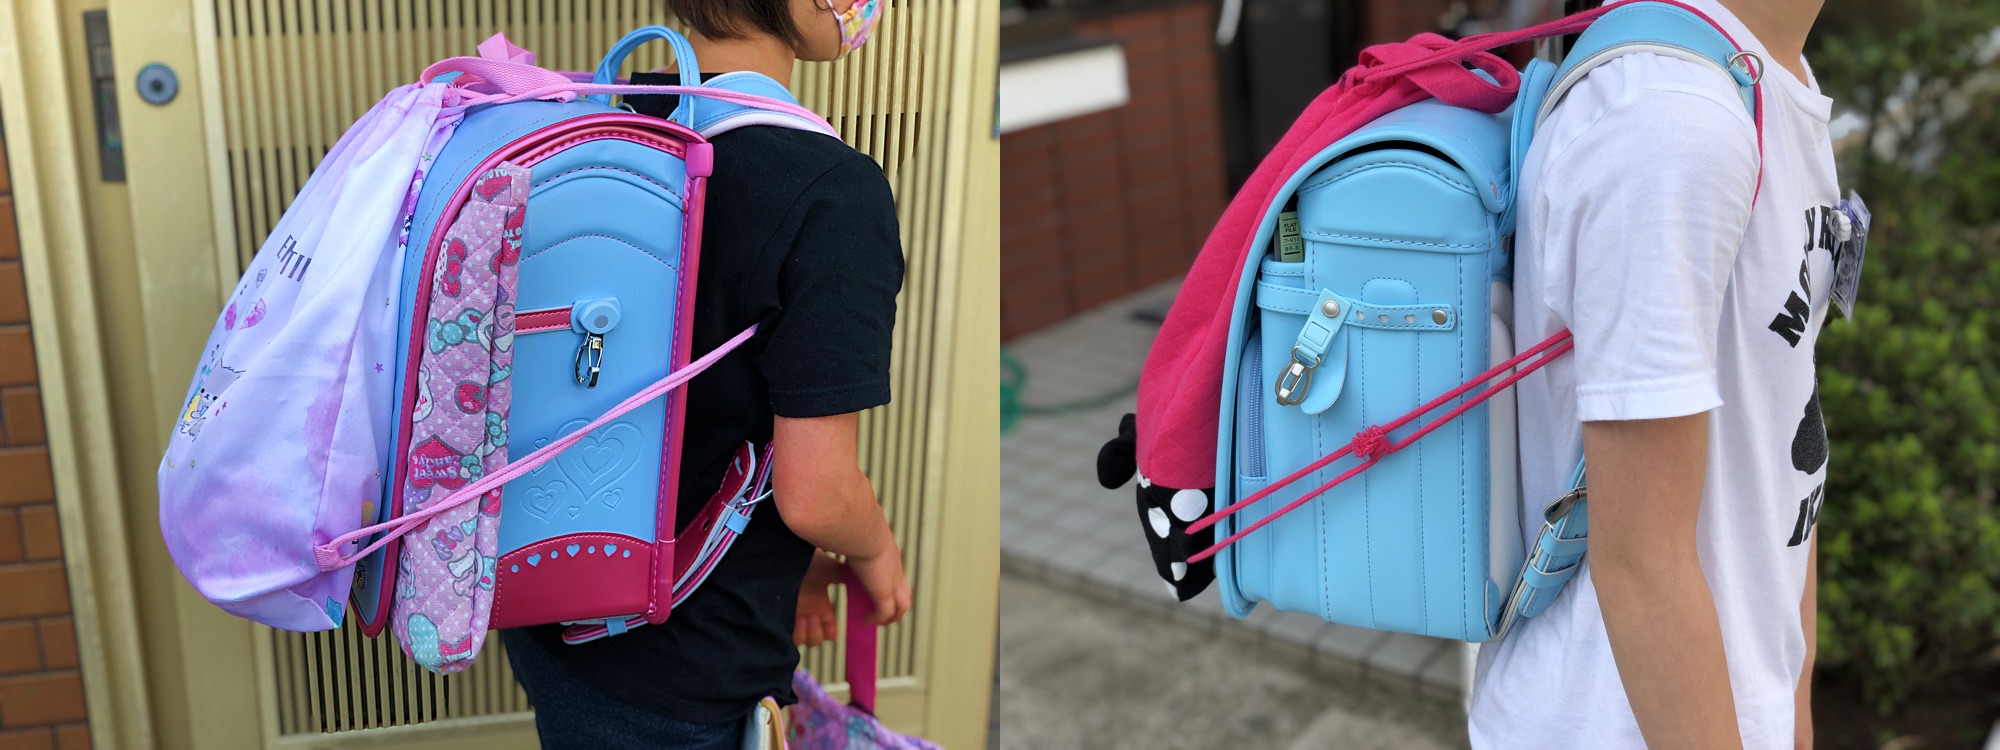 Profile photo of two children with backpacks